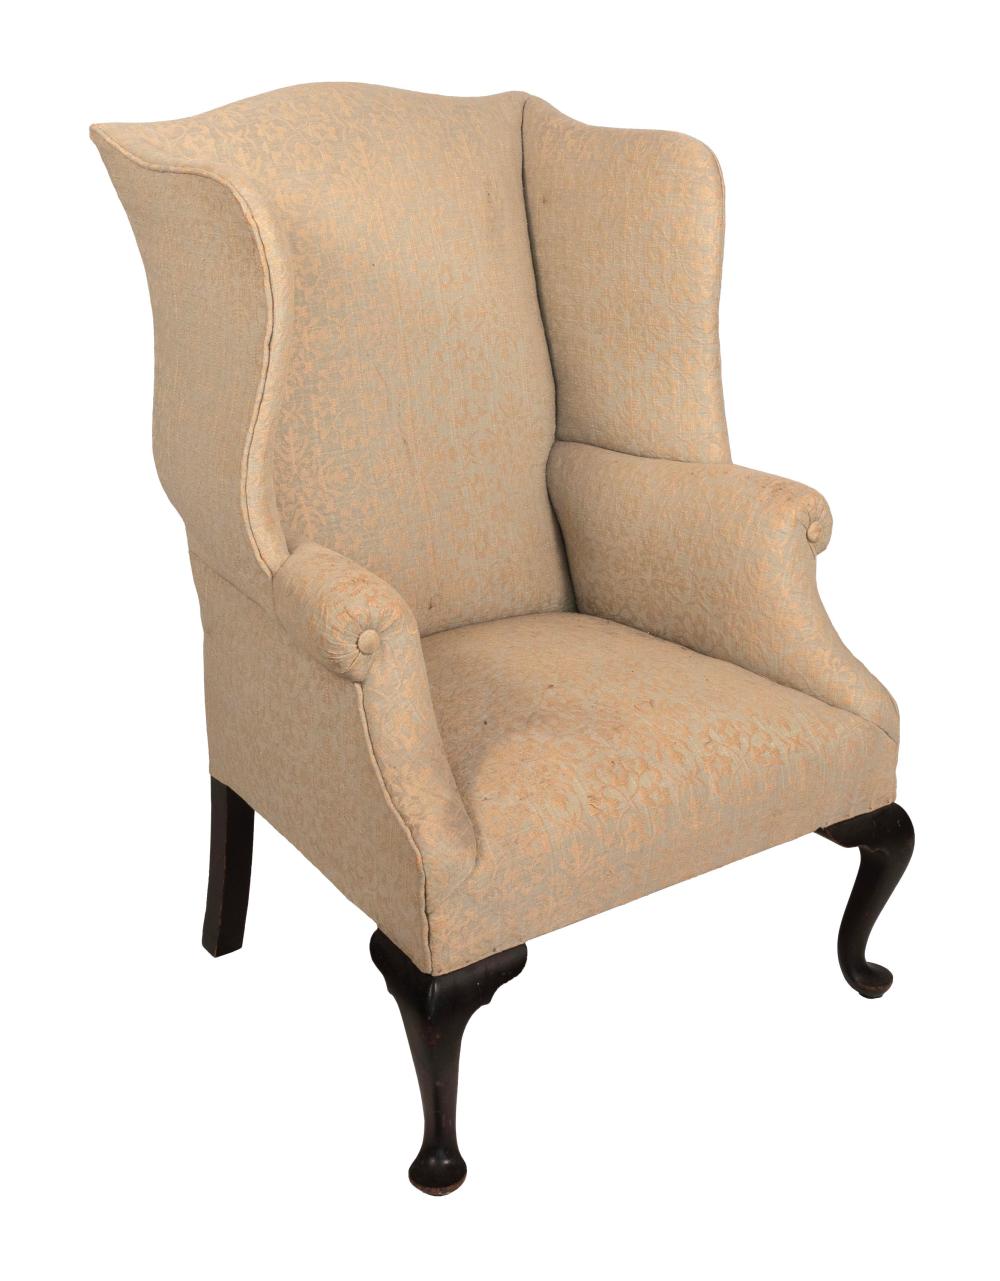 QUEEN ANNE STYLE WING CHAIR EARLY 2f1c0f